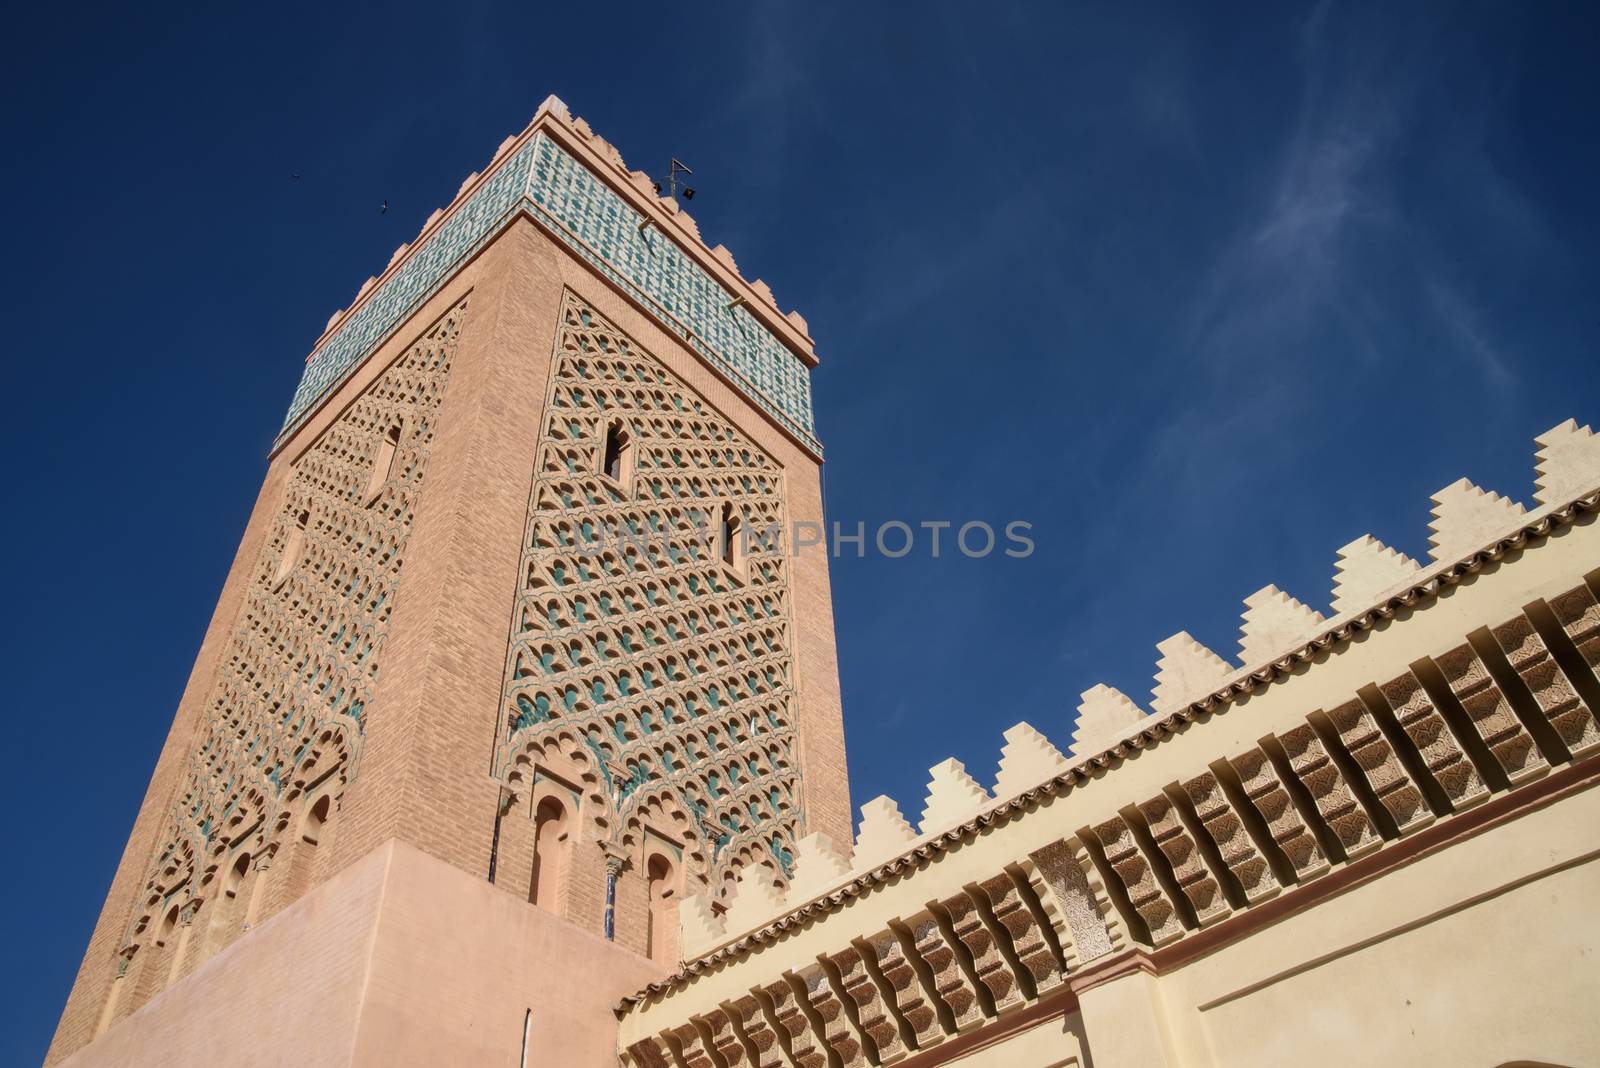 Mosque in Marrakesh, Morocco by johnnychaos